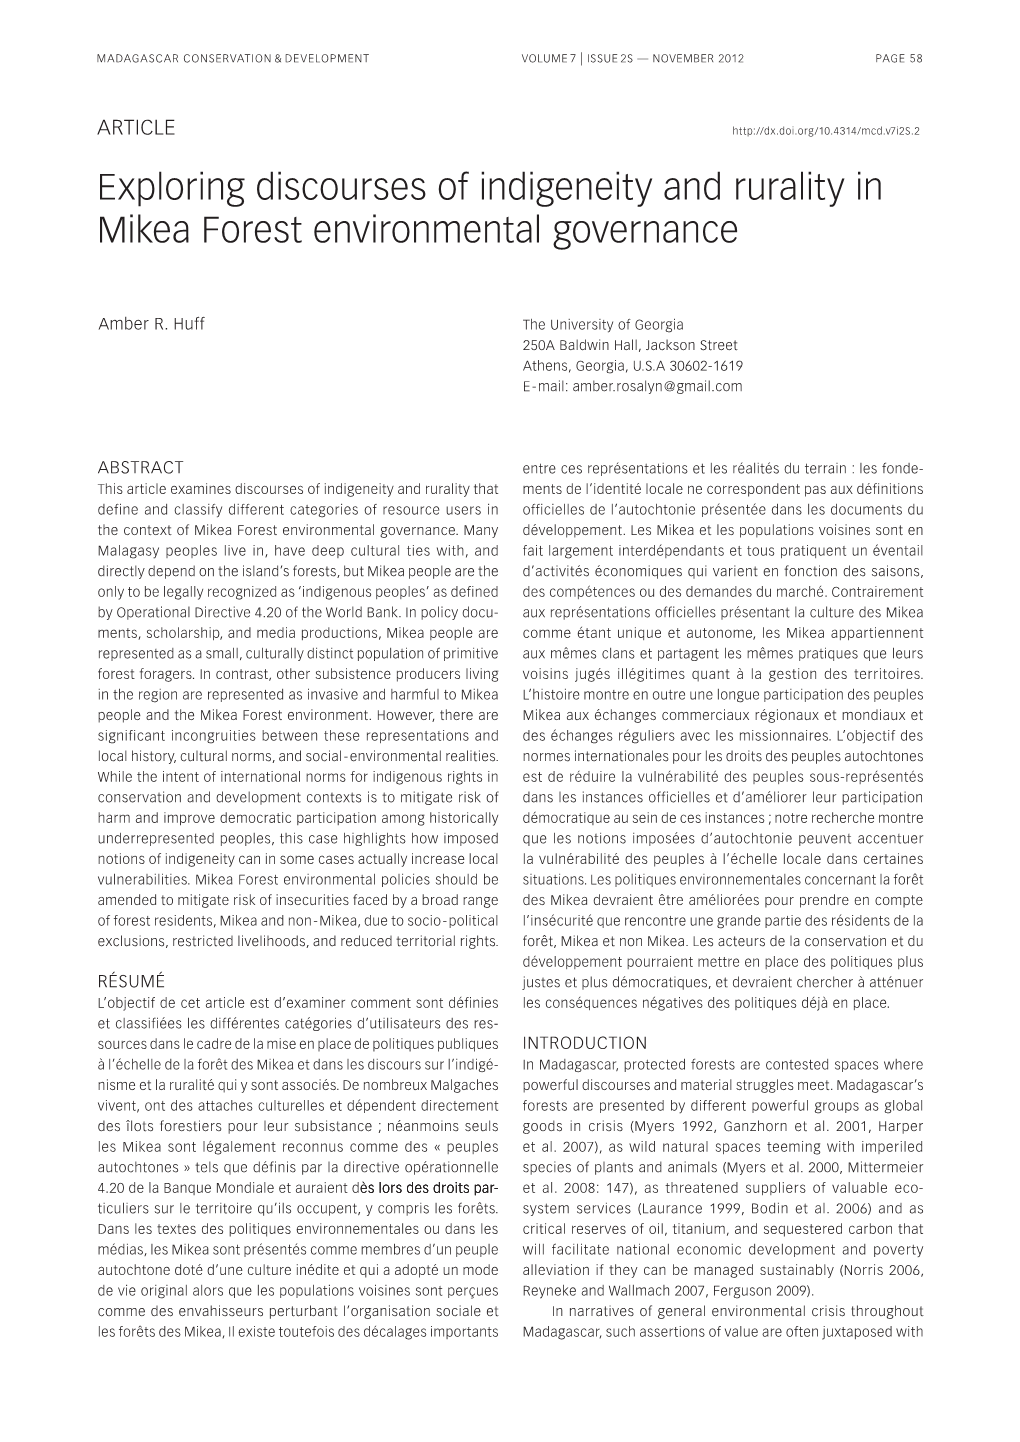 Exploring Discourses of Indigeneity and Rurality in Mikea Forest Environmental Governance